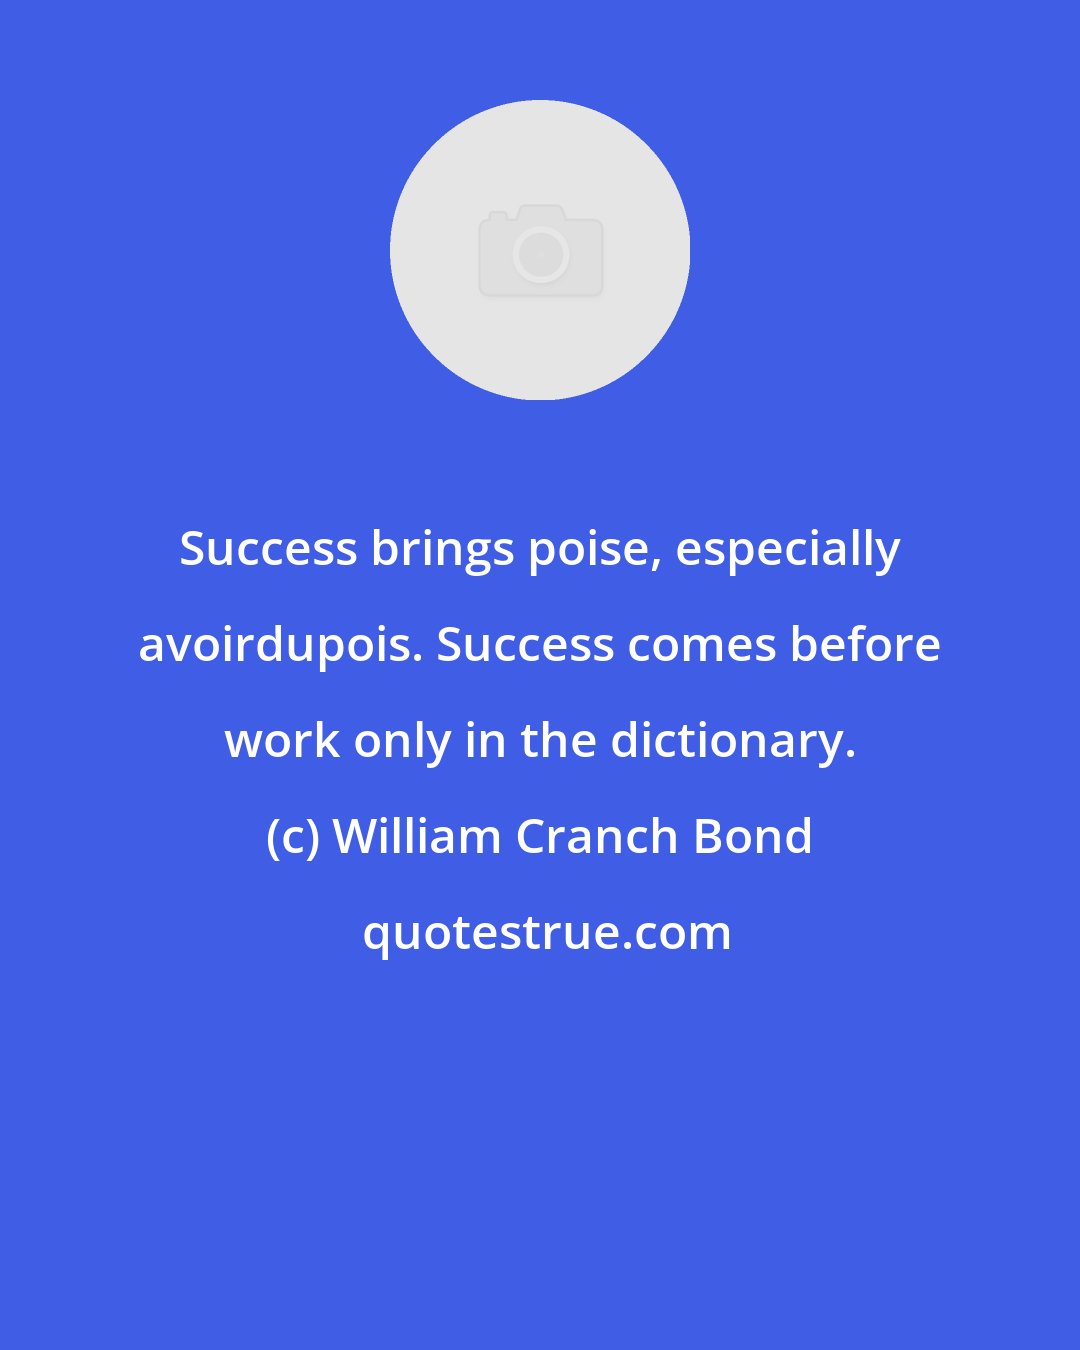 William Cranch Bond: Success brings poise, especially avoirdupois. Success comes before work only in the dictionary.